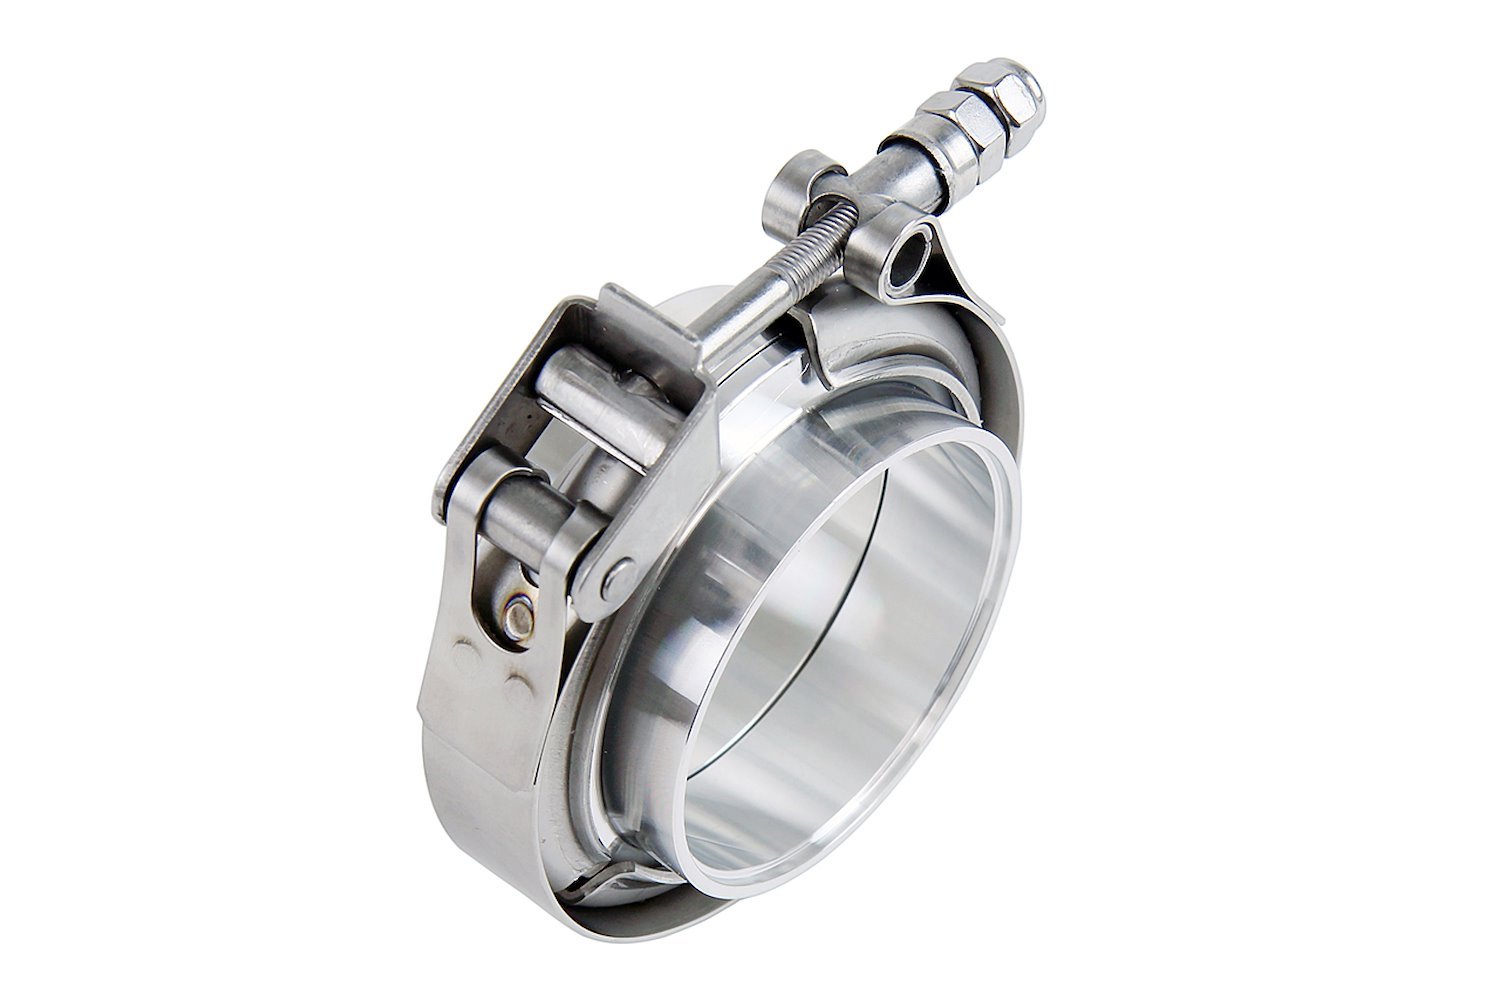 VCKIT-AL-350 V-Band Clamp w/ Interlocking Aluminum Flanges, For 3.5 in. OD Tubing.